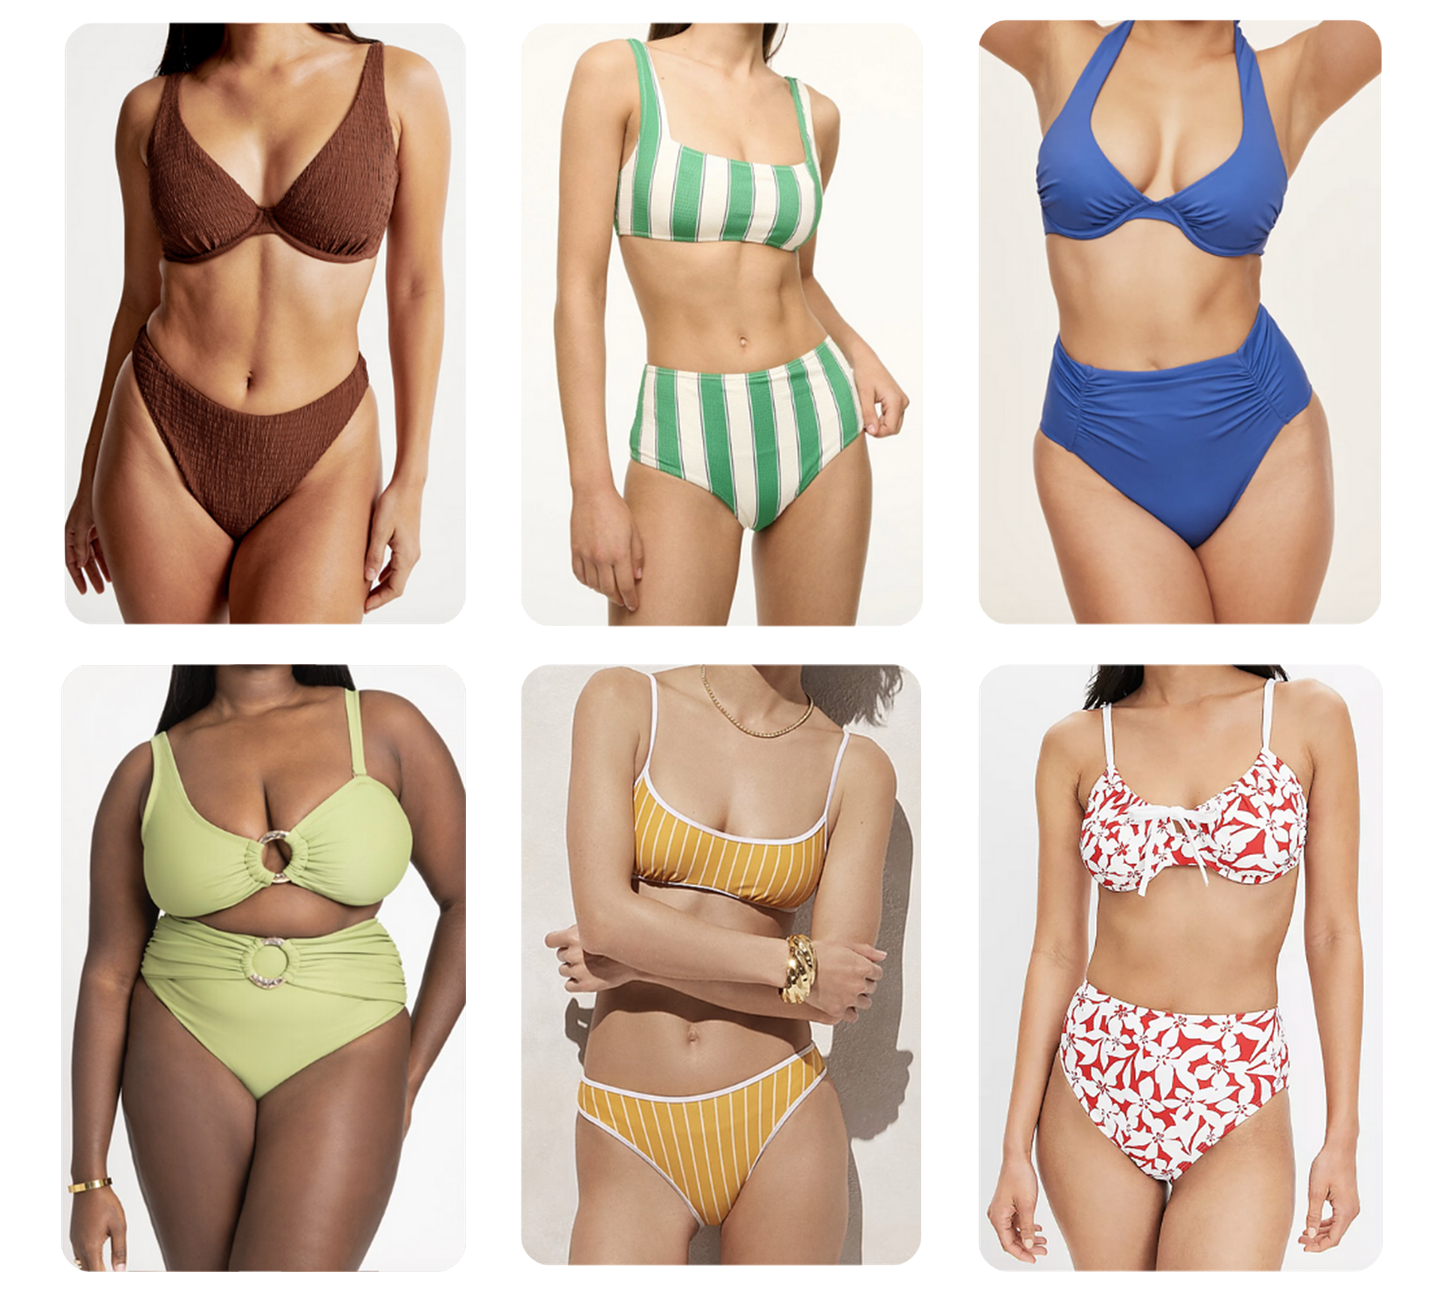 Images of full-coverage bikinis from various brands.